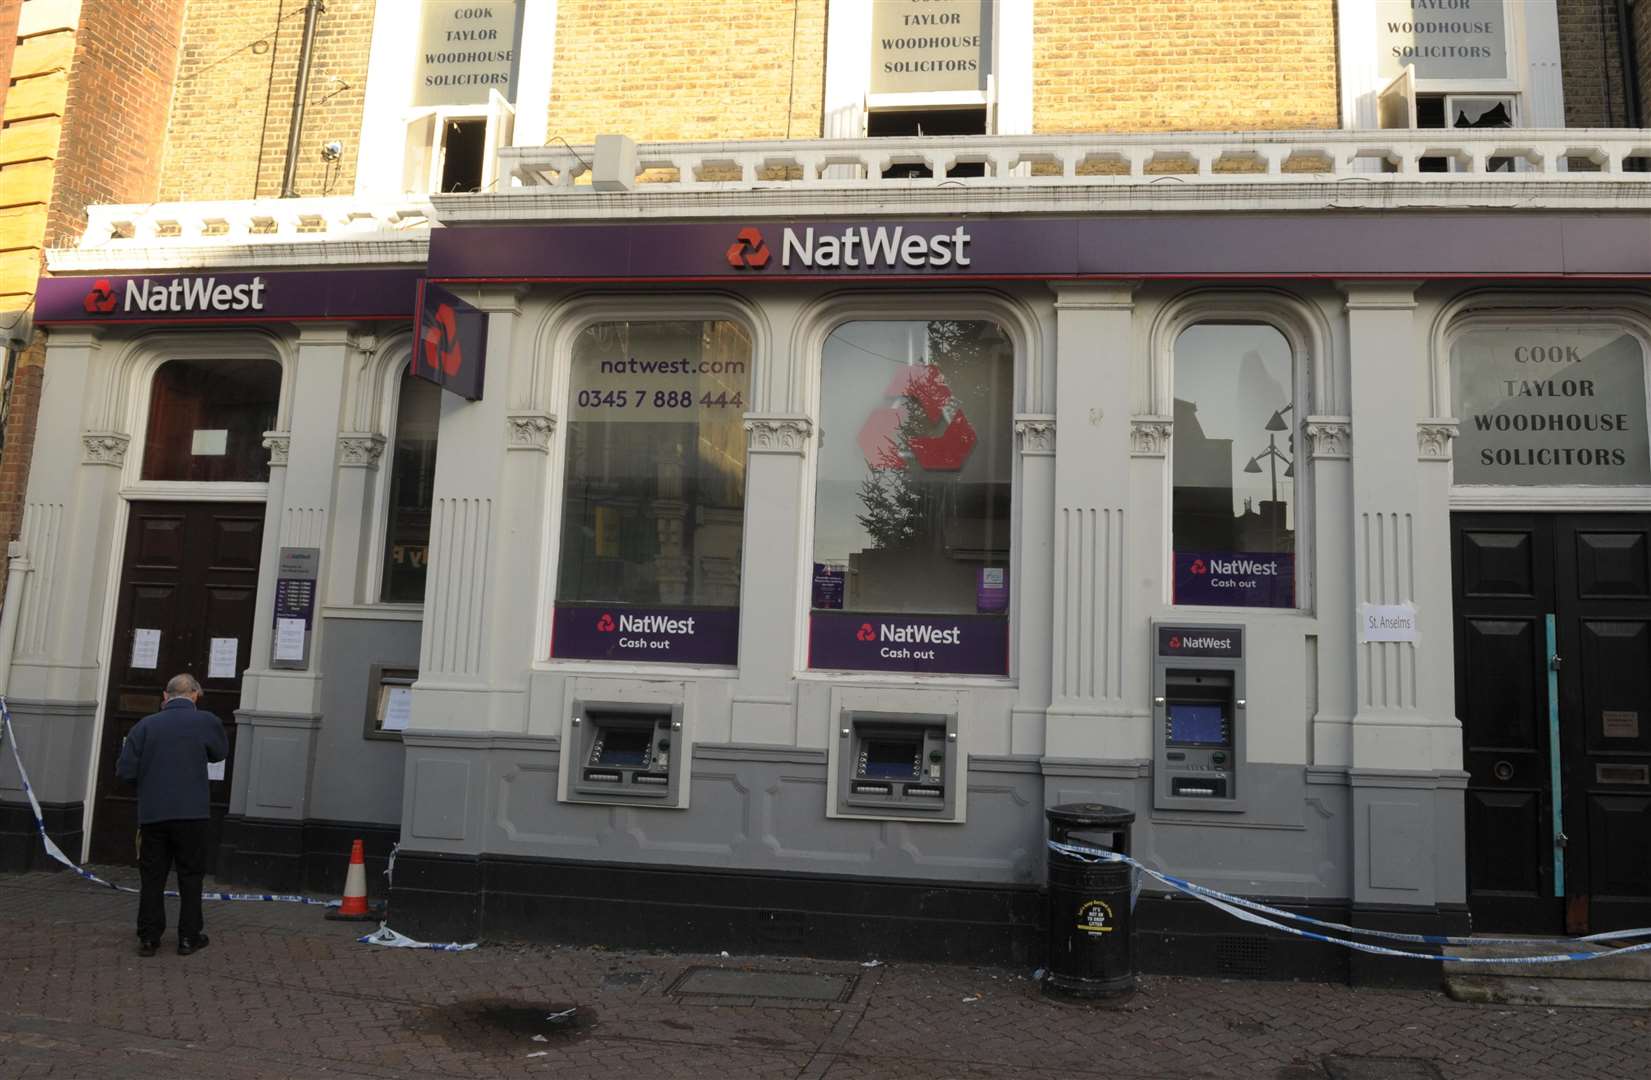 The Natwest branch has been closed since a fire on December 9